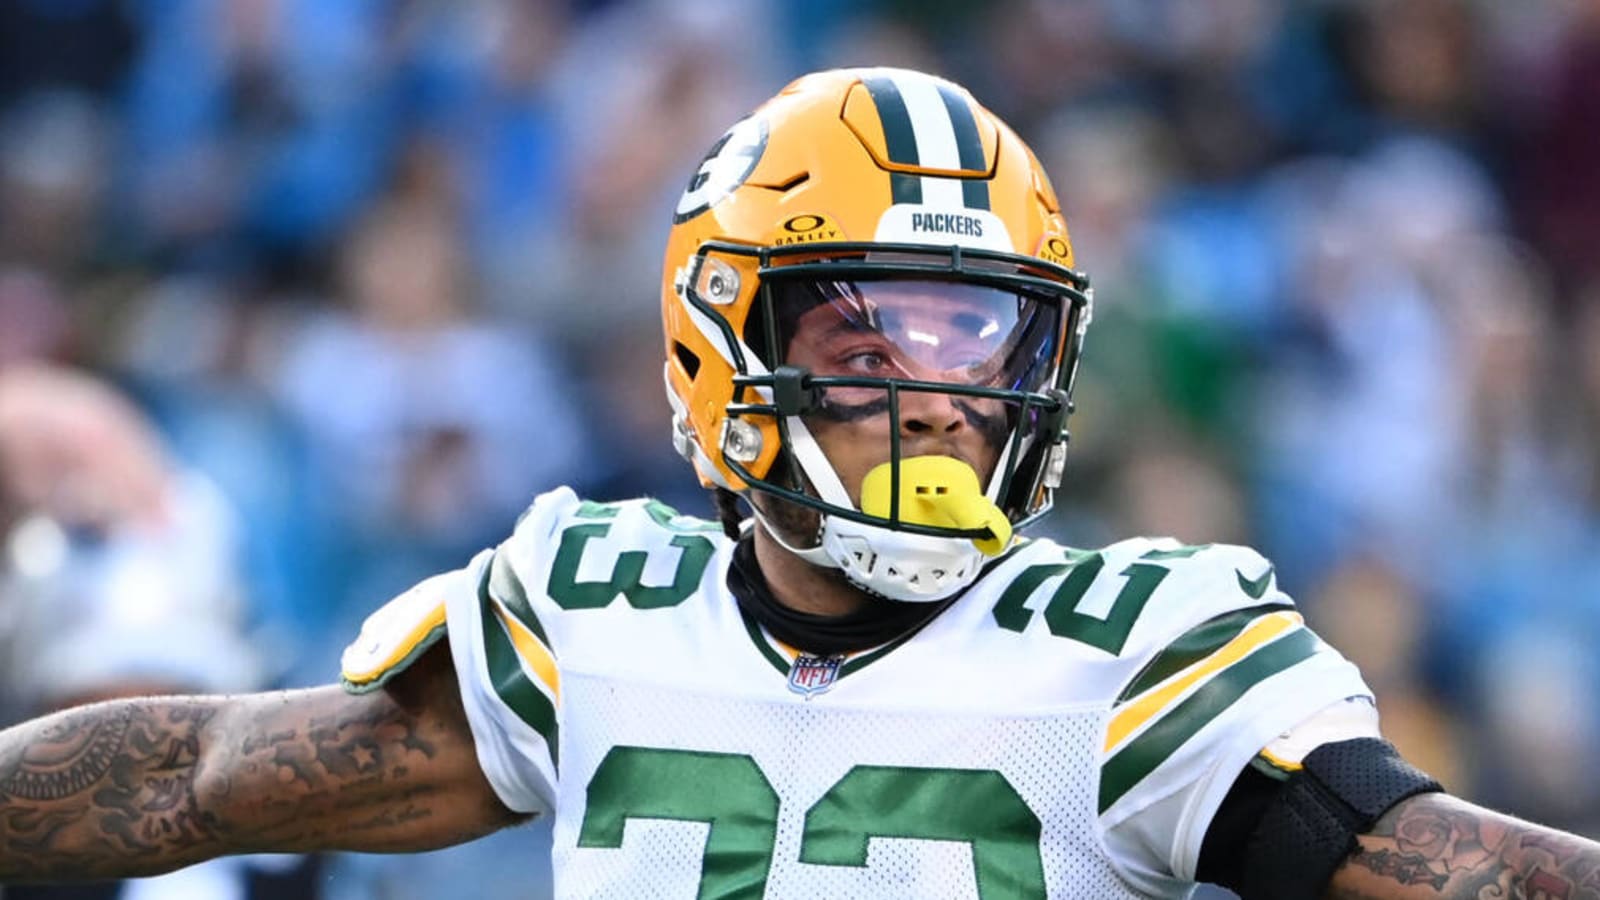 Packers' Alexander has not been impactful enough to act brash